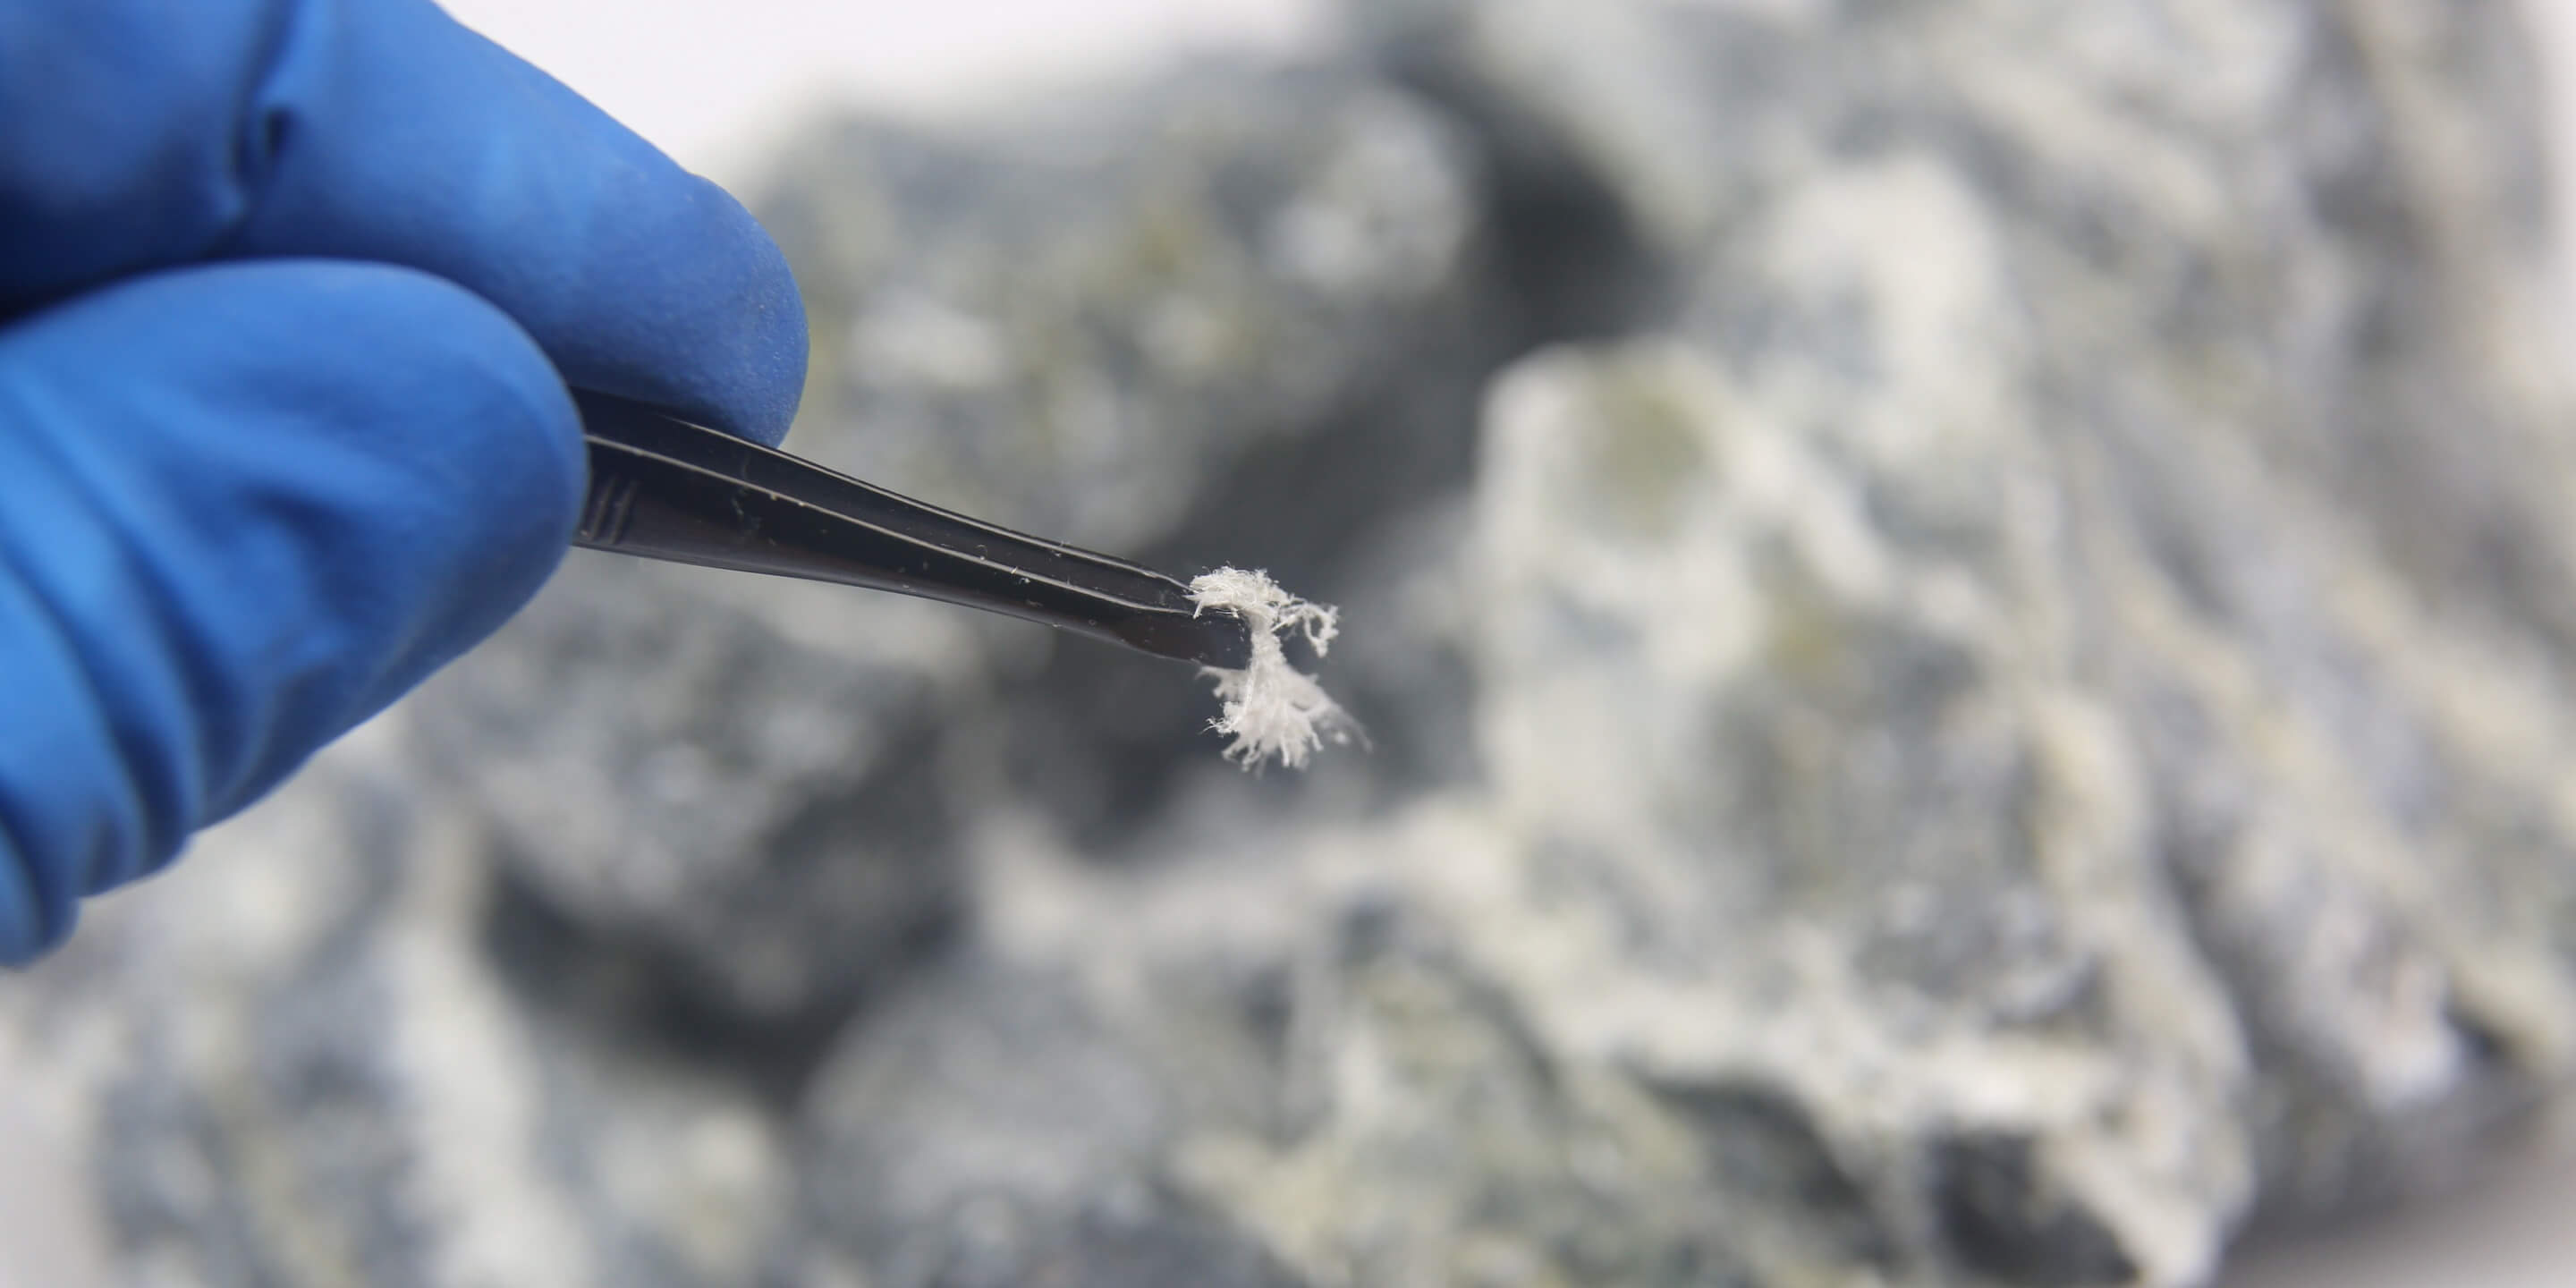 An image of a gloved hand holding up a piece of asbestos with a tweezers.